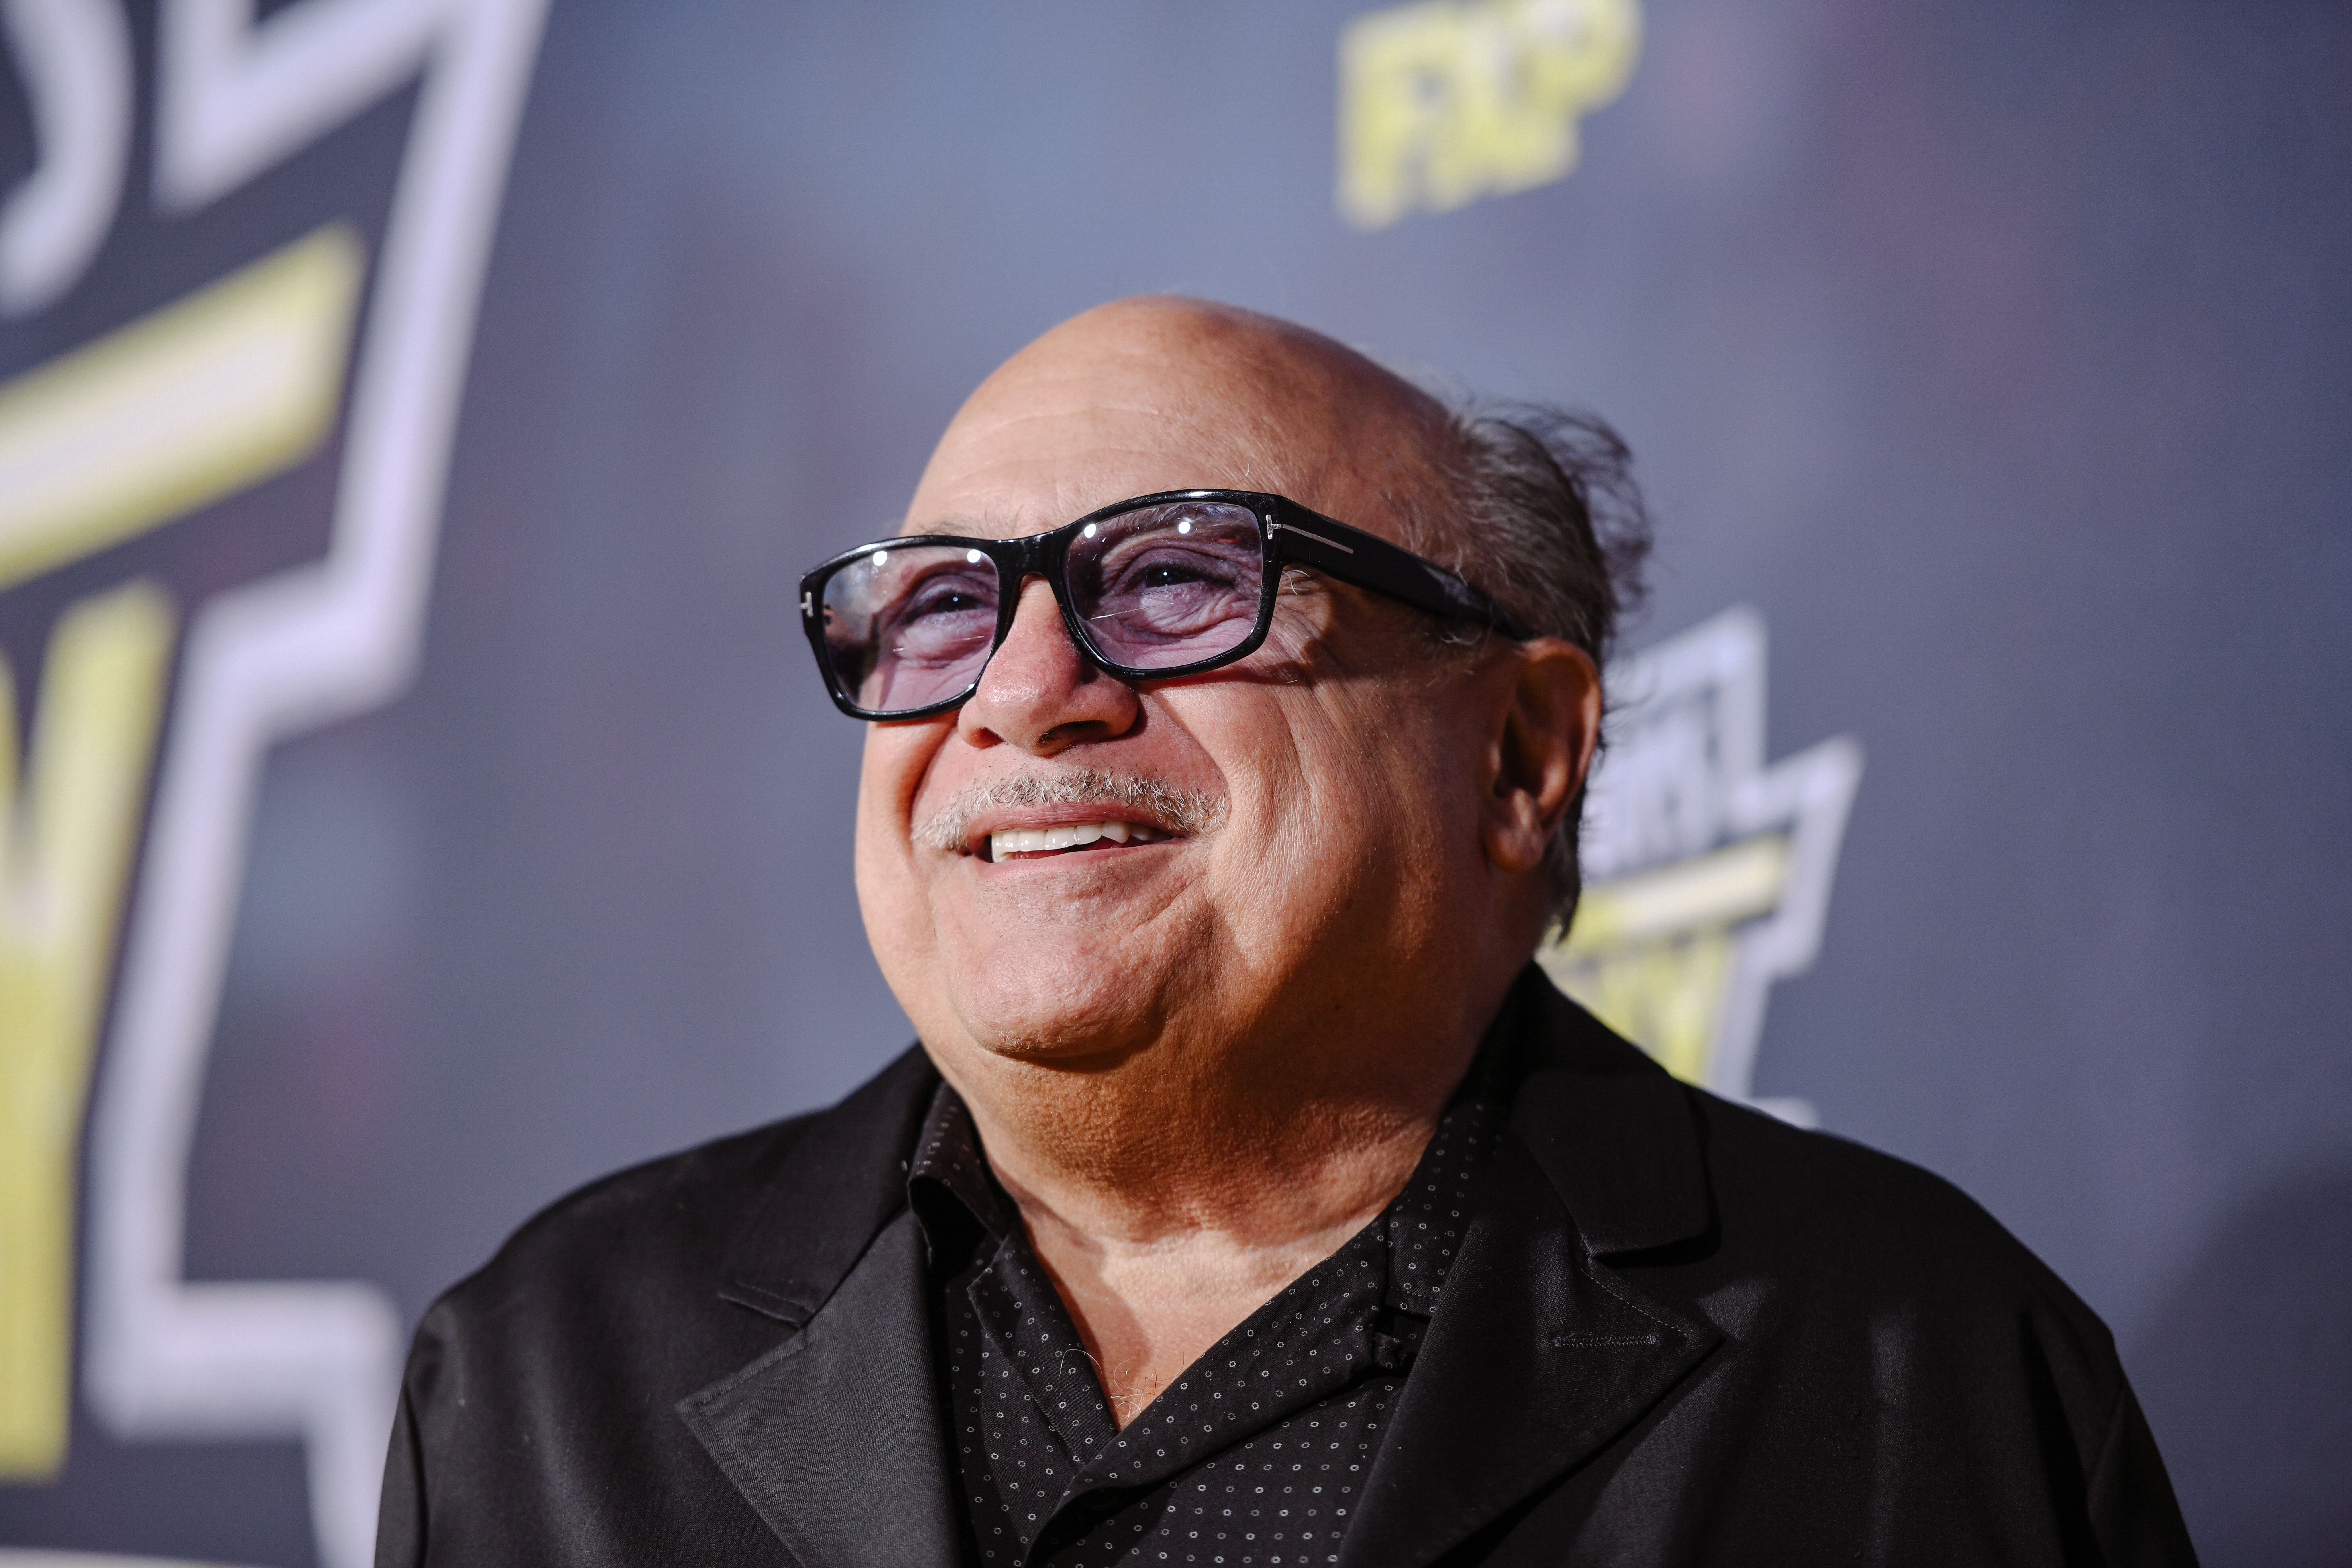 Danny DeVito arrives at the premiere of FX's "It's Always Sunny In Philadelphia" season 14. | Source: Getty Images